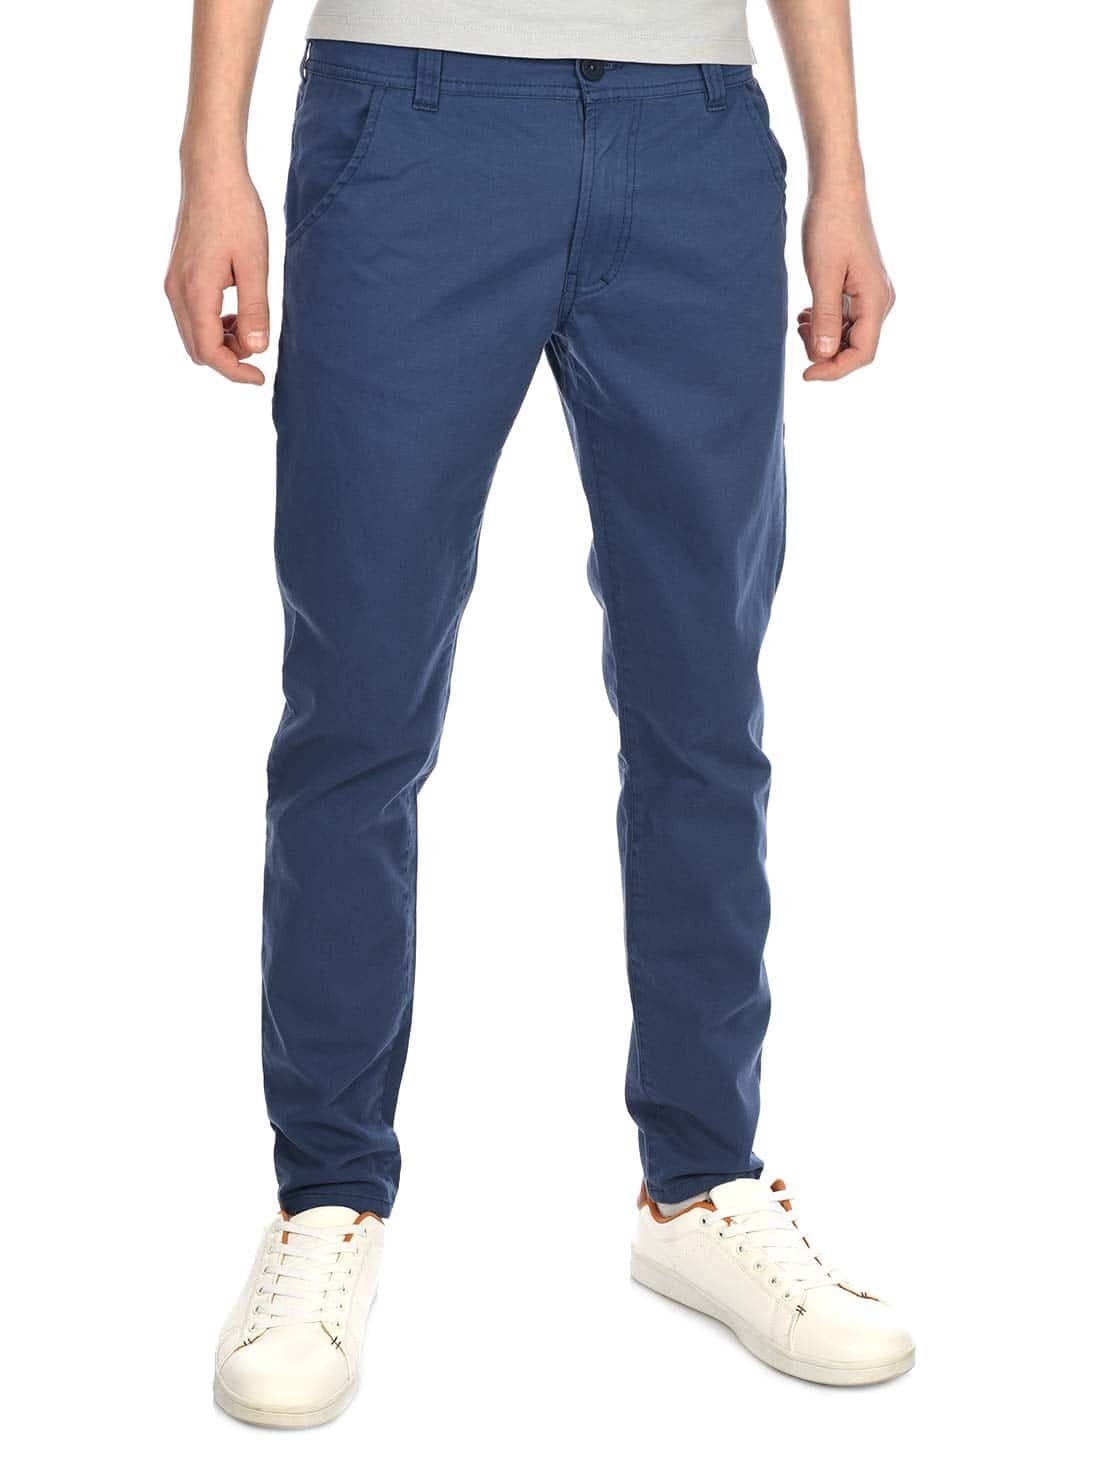 BEZLIT Chinohose Jungen Hose casual Jeansblau (1-tlg) Chino